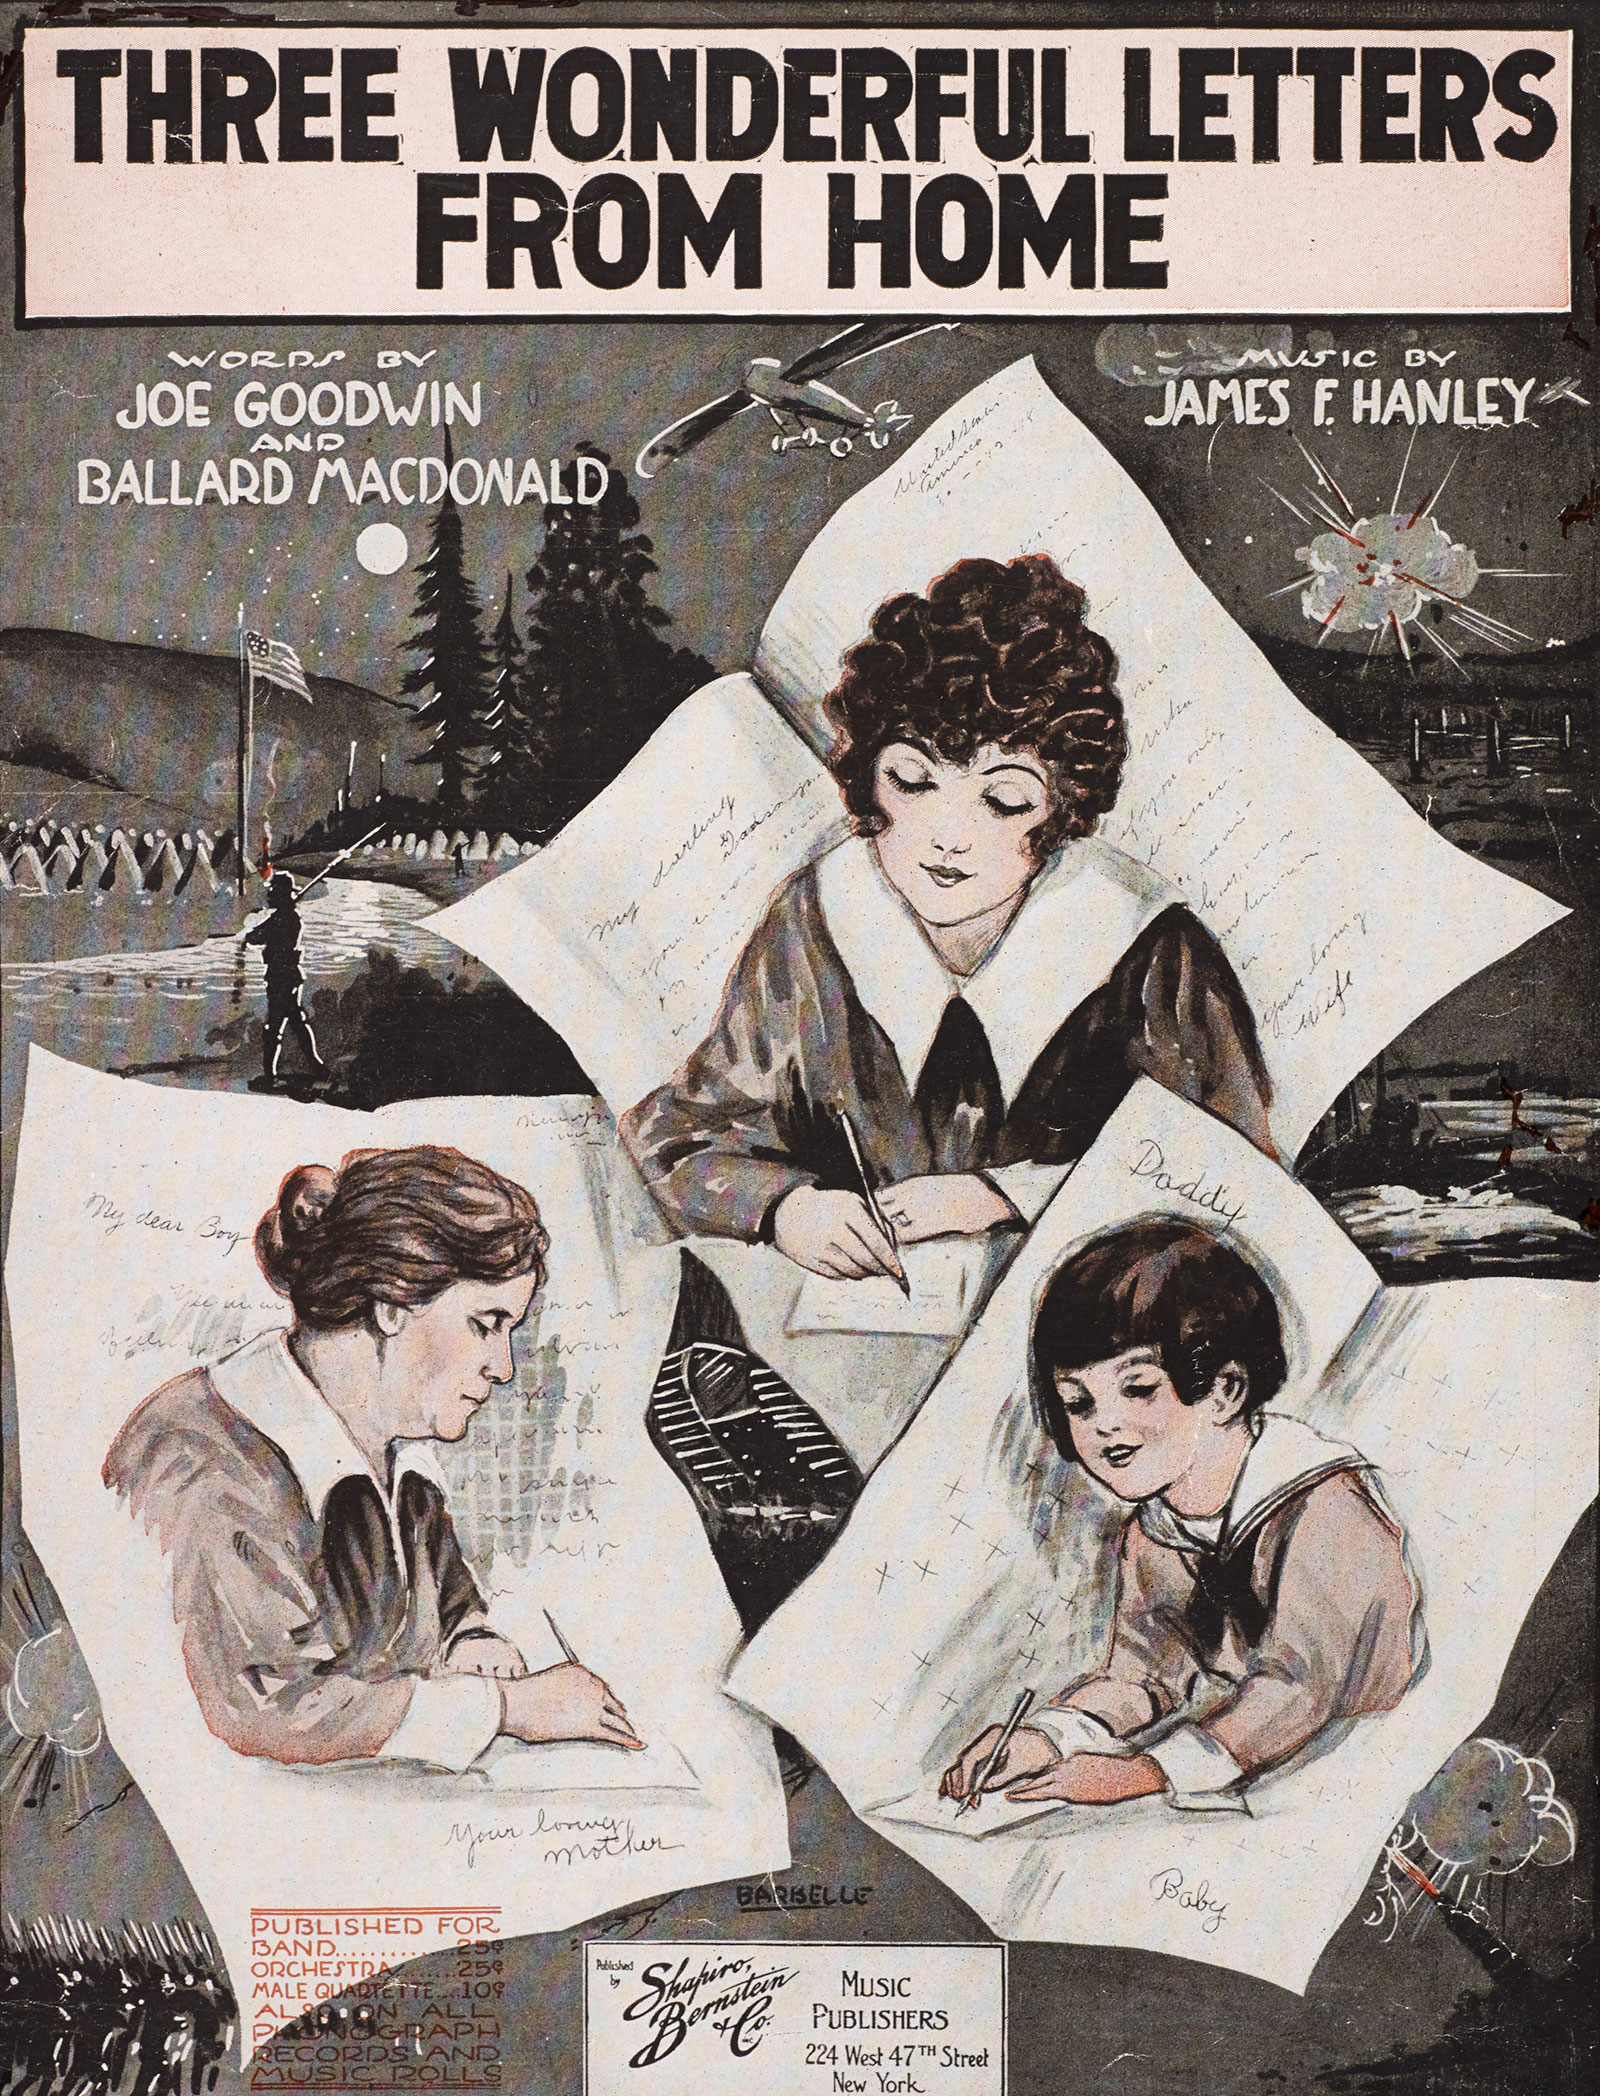 Sheet music cover showing women and a girl writing letters